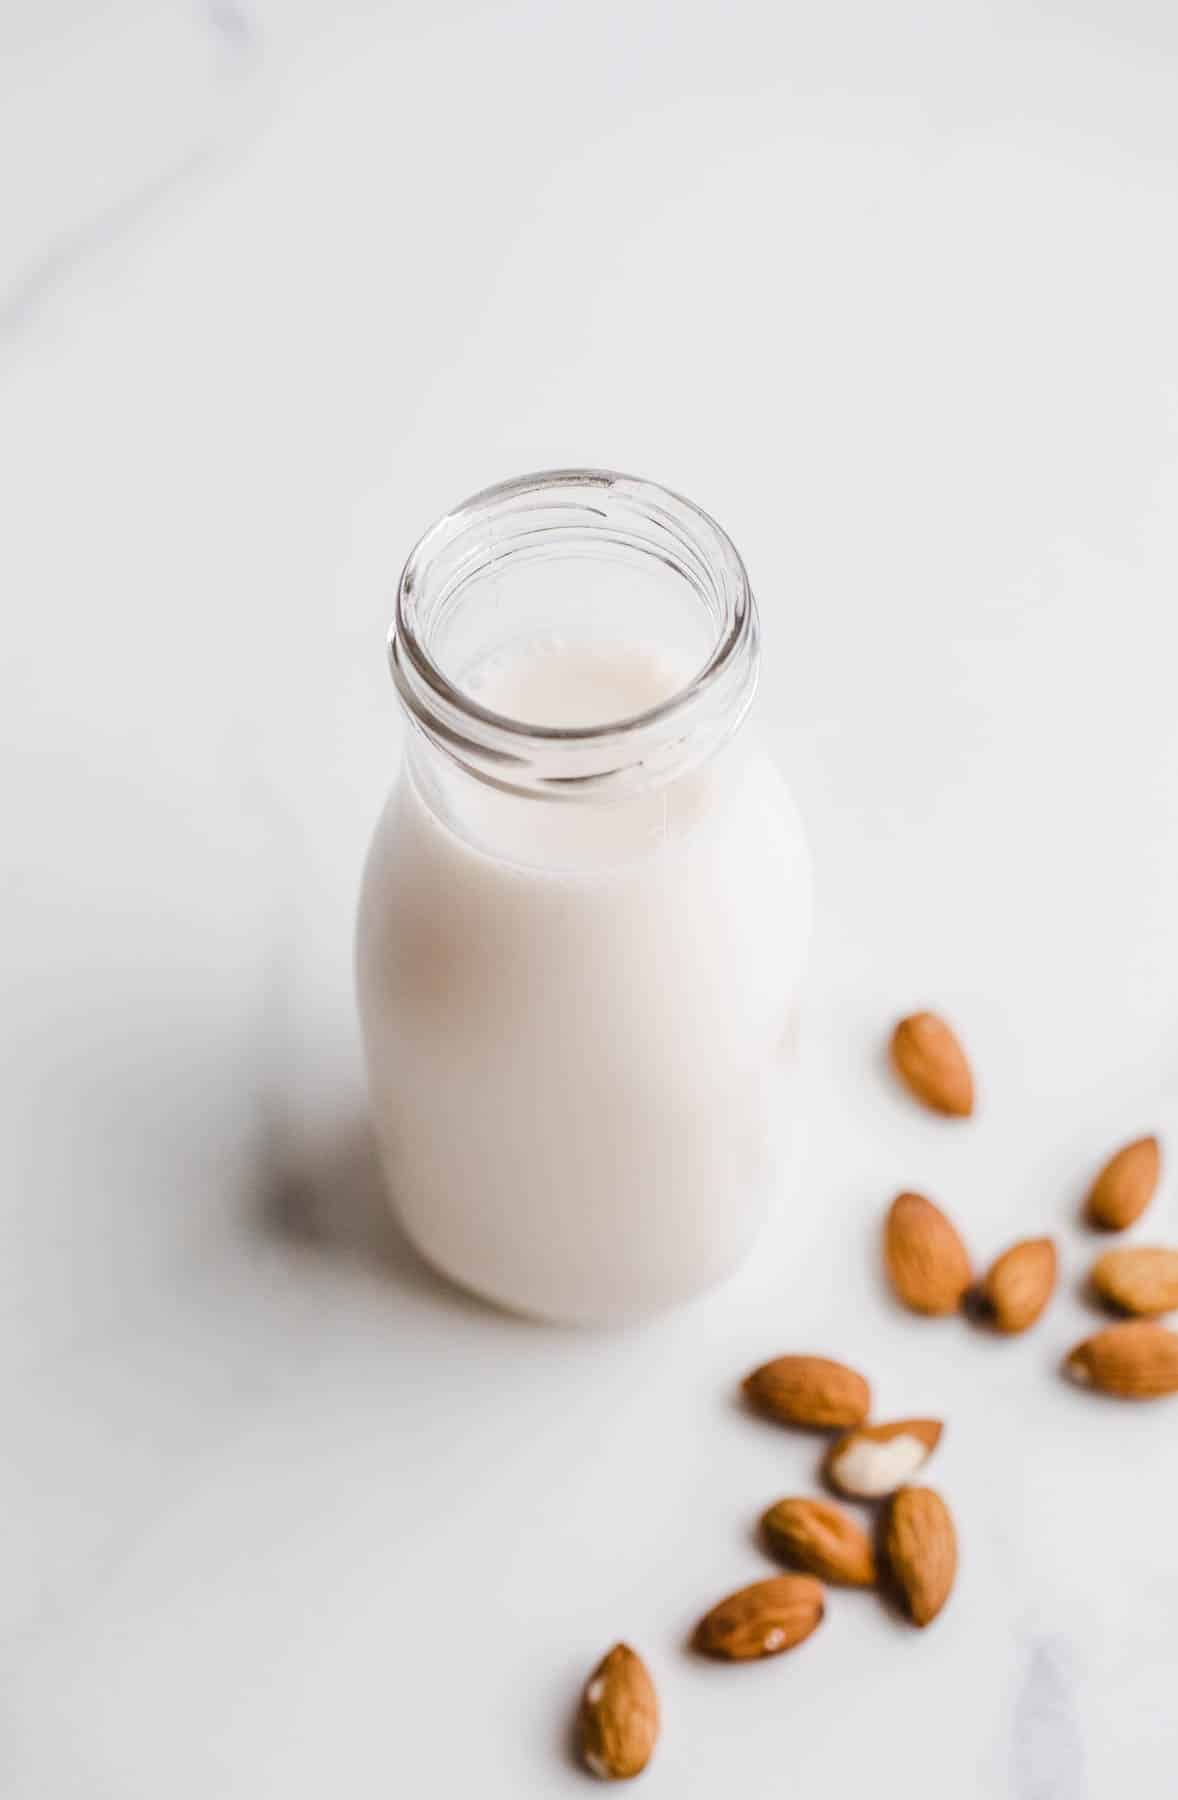 A bottle filled with almond milk next to scattered almonds.